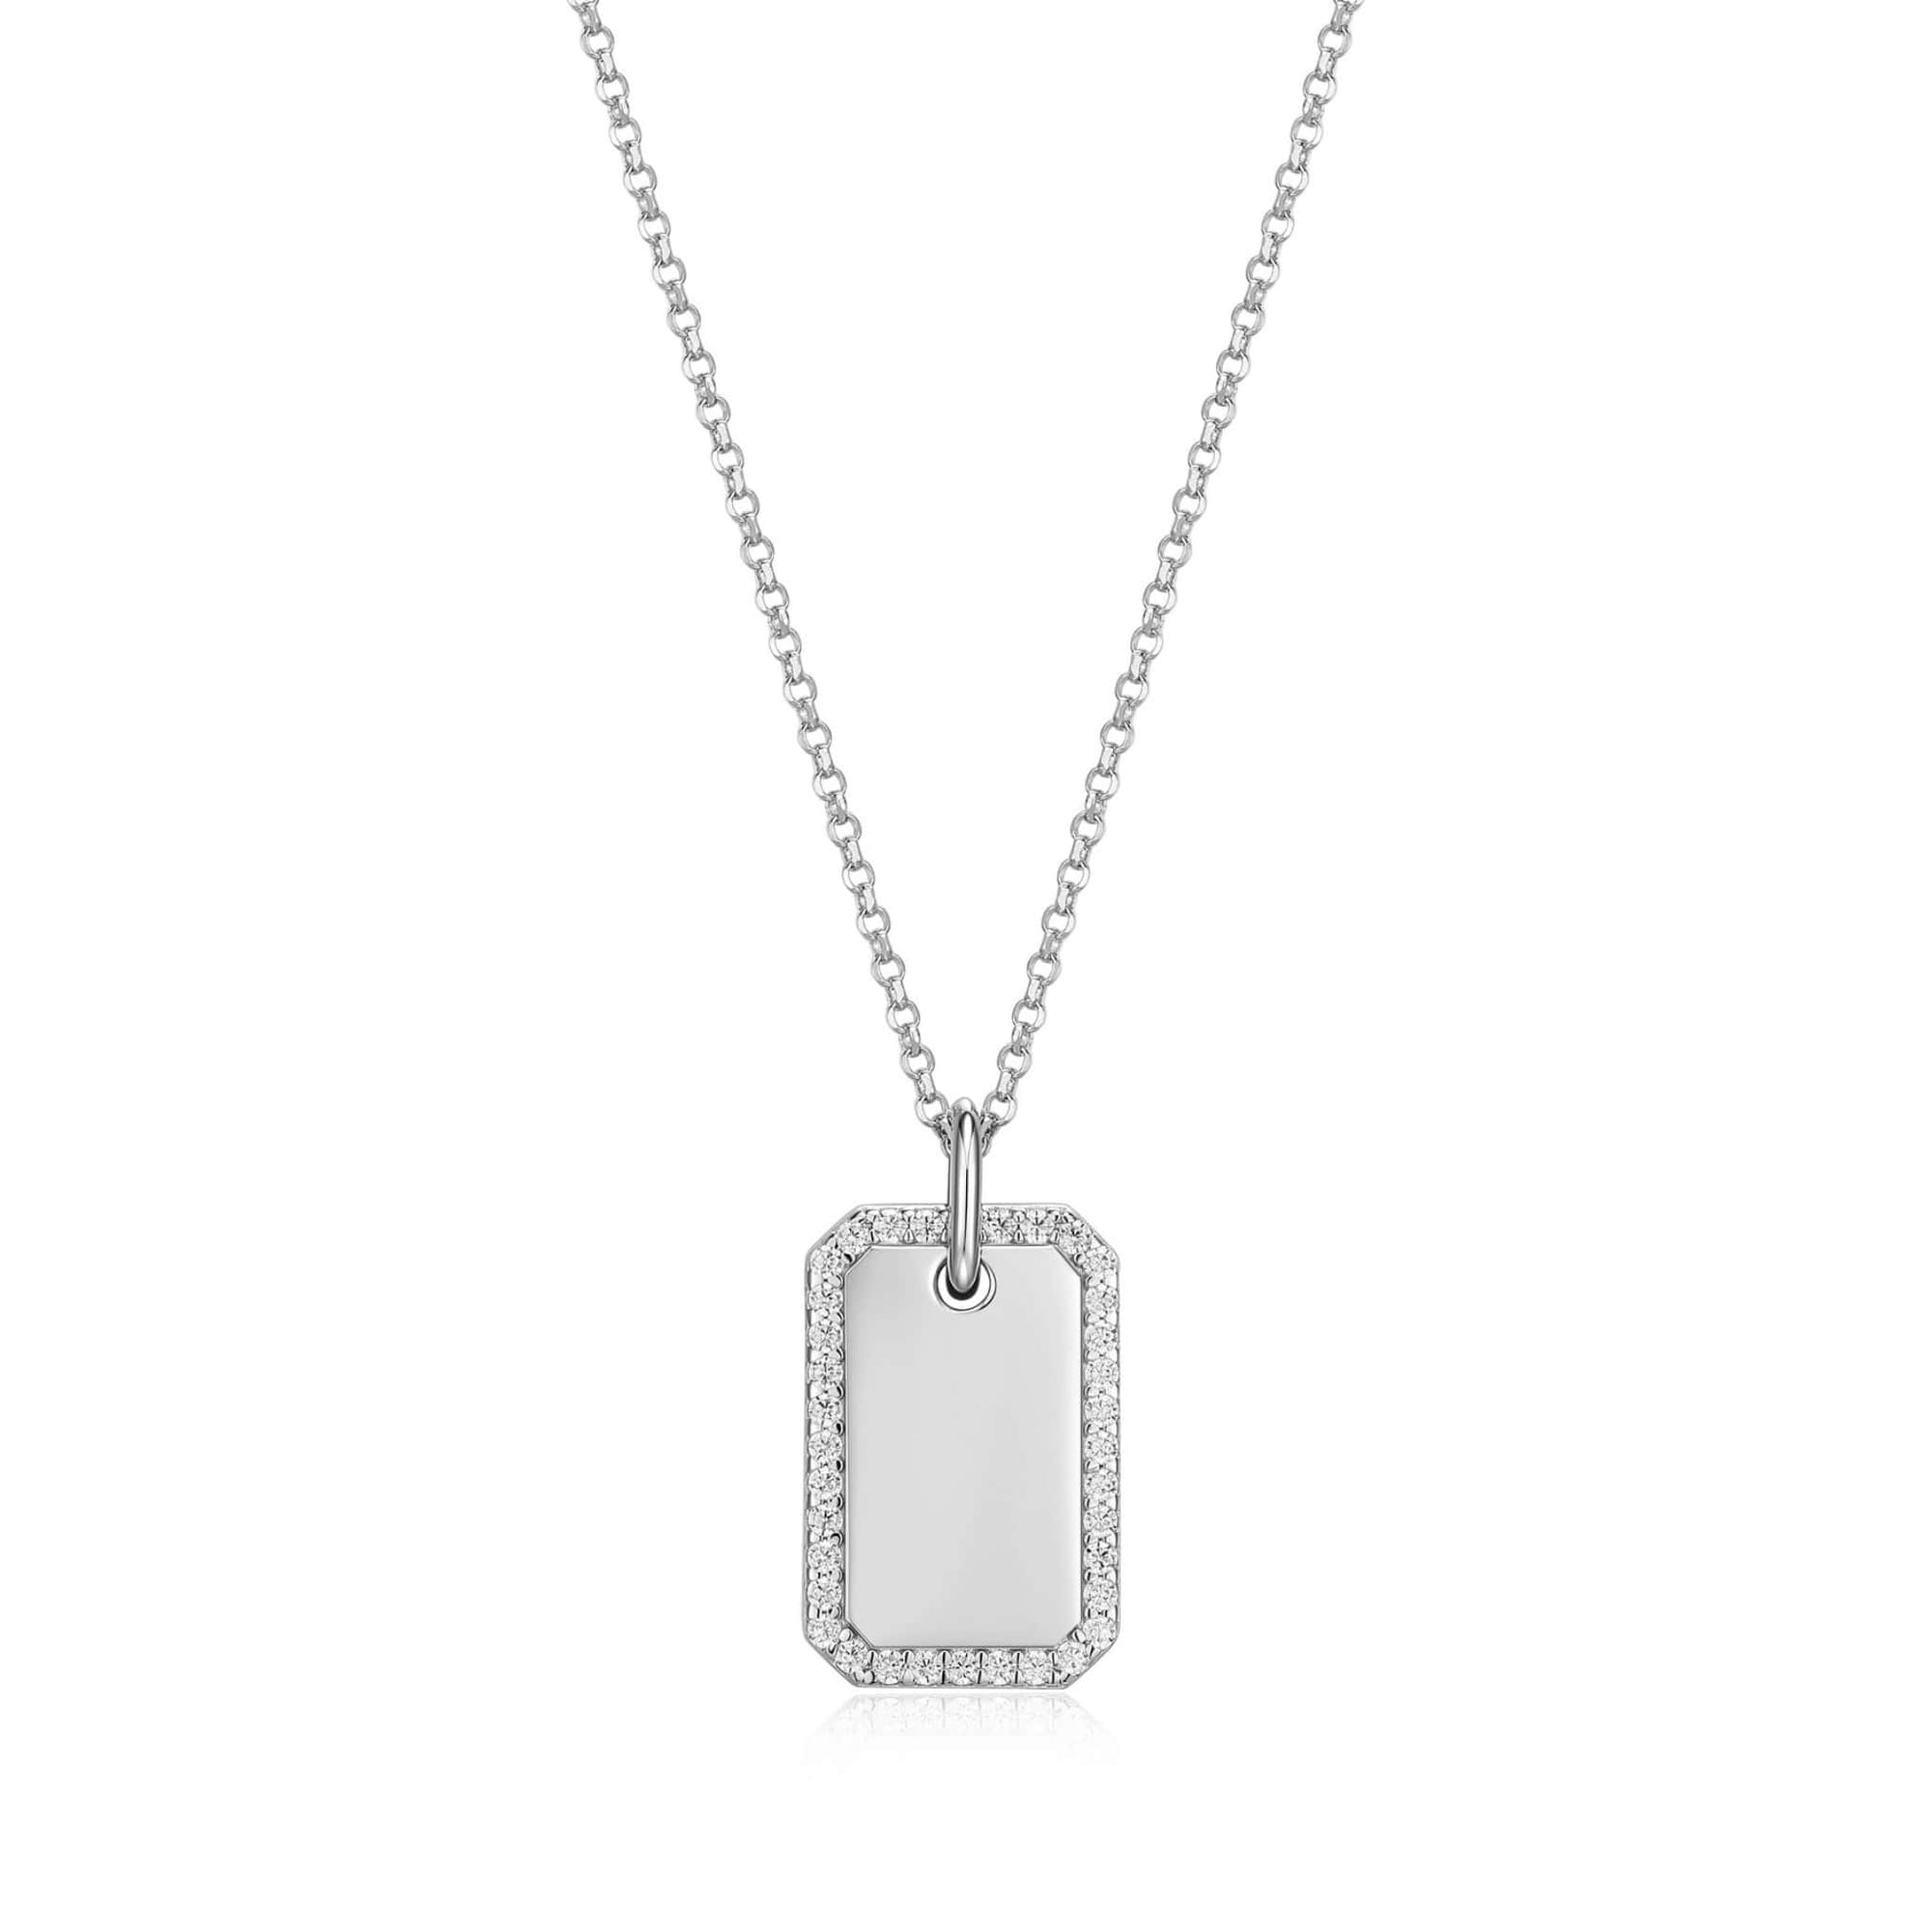 Diamondlite Dog Tag Silver Necklace at Arman's Jewellers